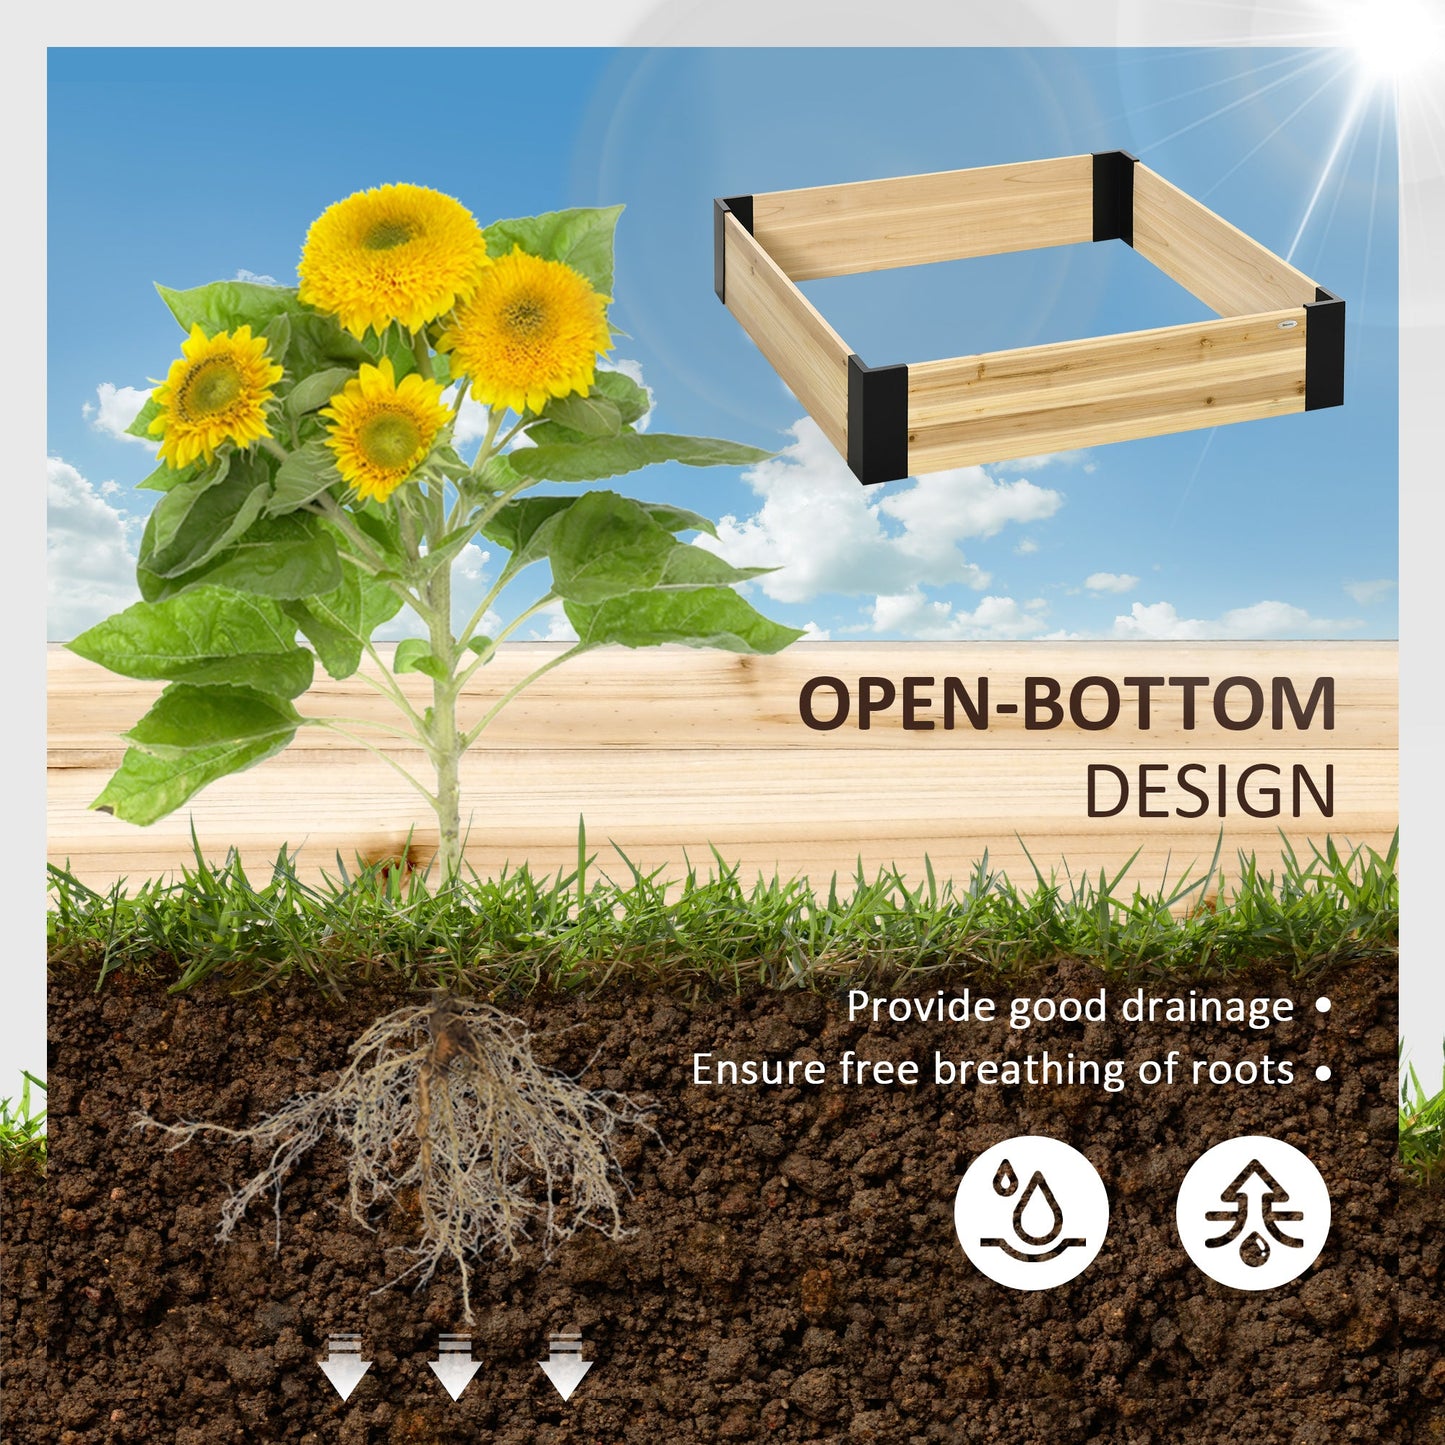 47" x 47" Raised Garden Bed with Metal Corner Bracket, Easy to Install Planter Box for Growing Vegetables, Flowers, Fruits, Herbs, and Succulents at Gallery Canada